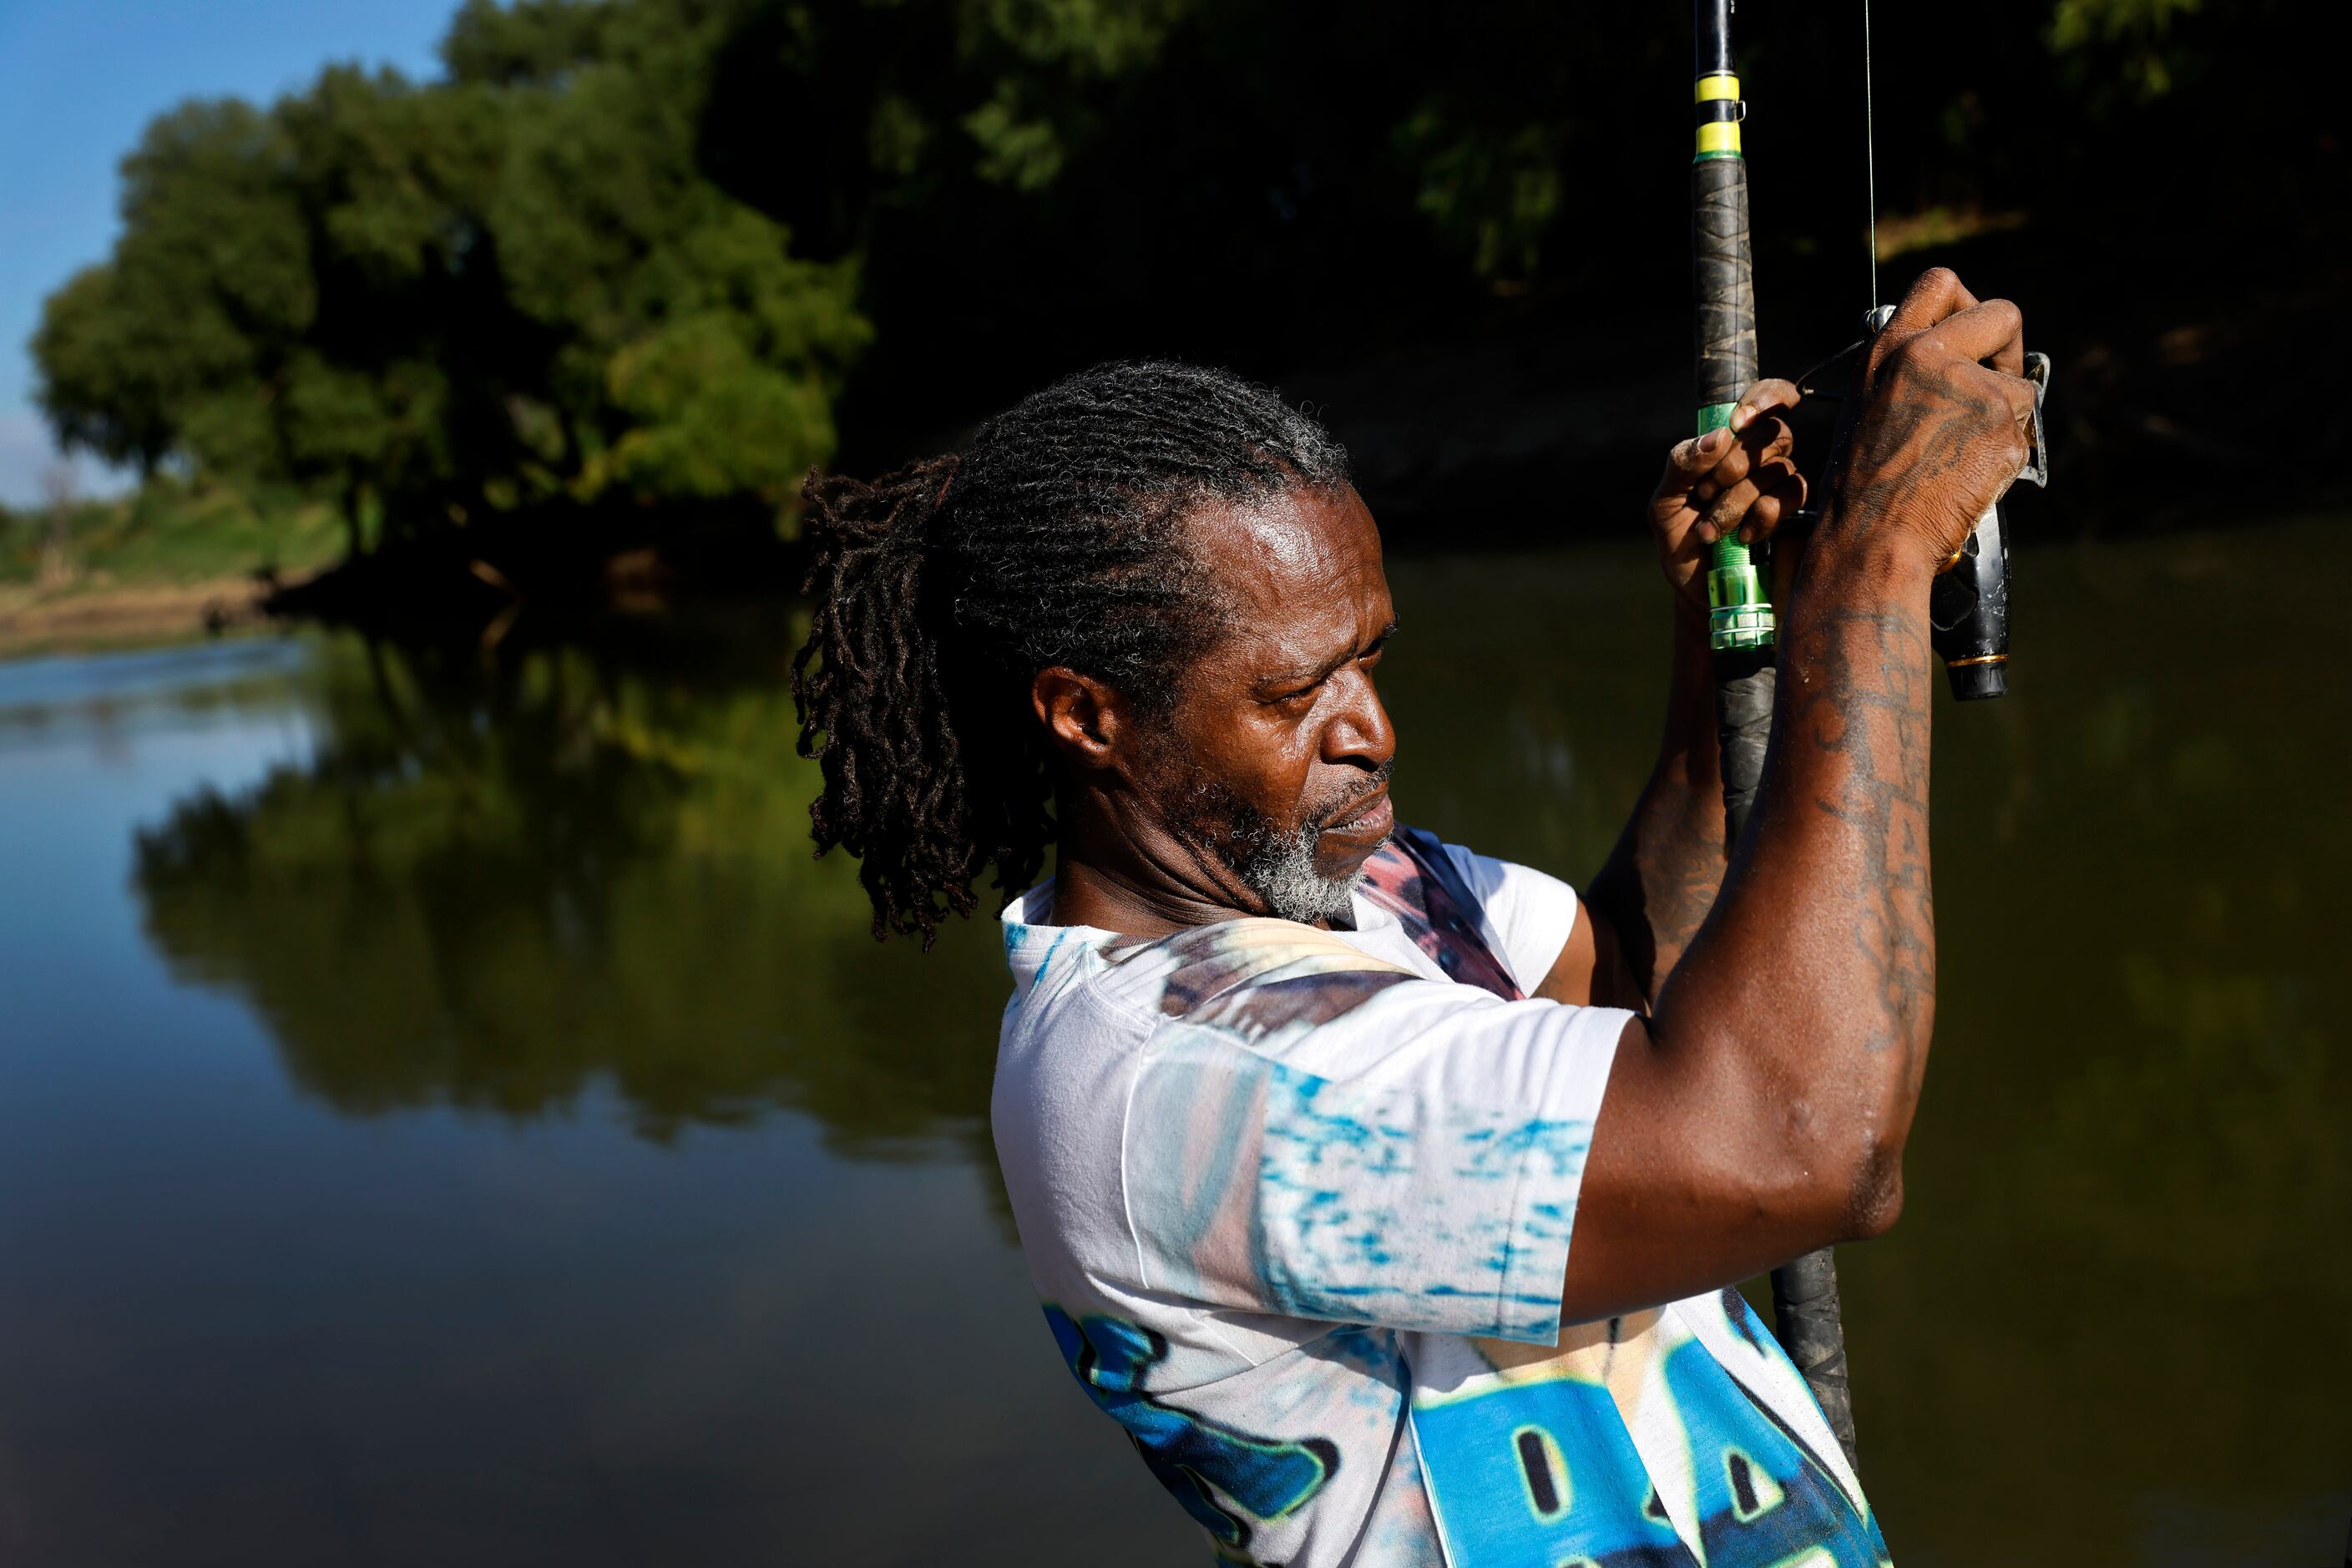 Odell Allen reels in his line to find he caught a softshell turtle instead of an alligator...